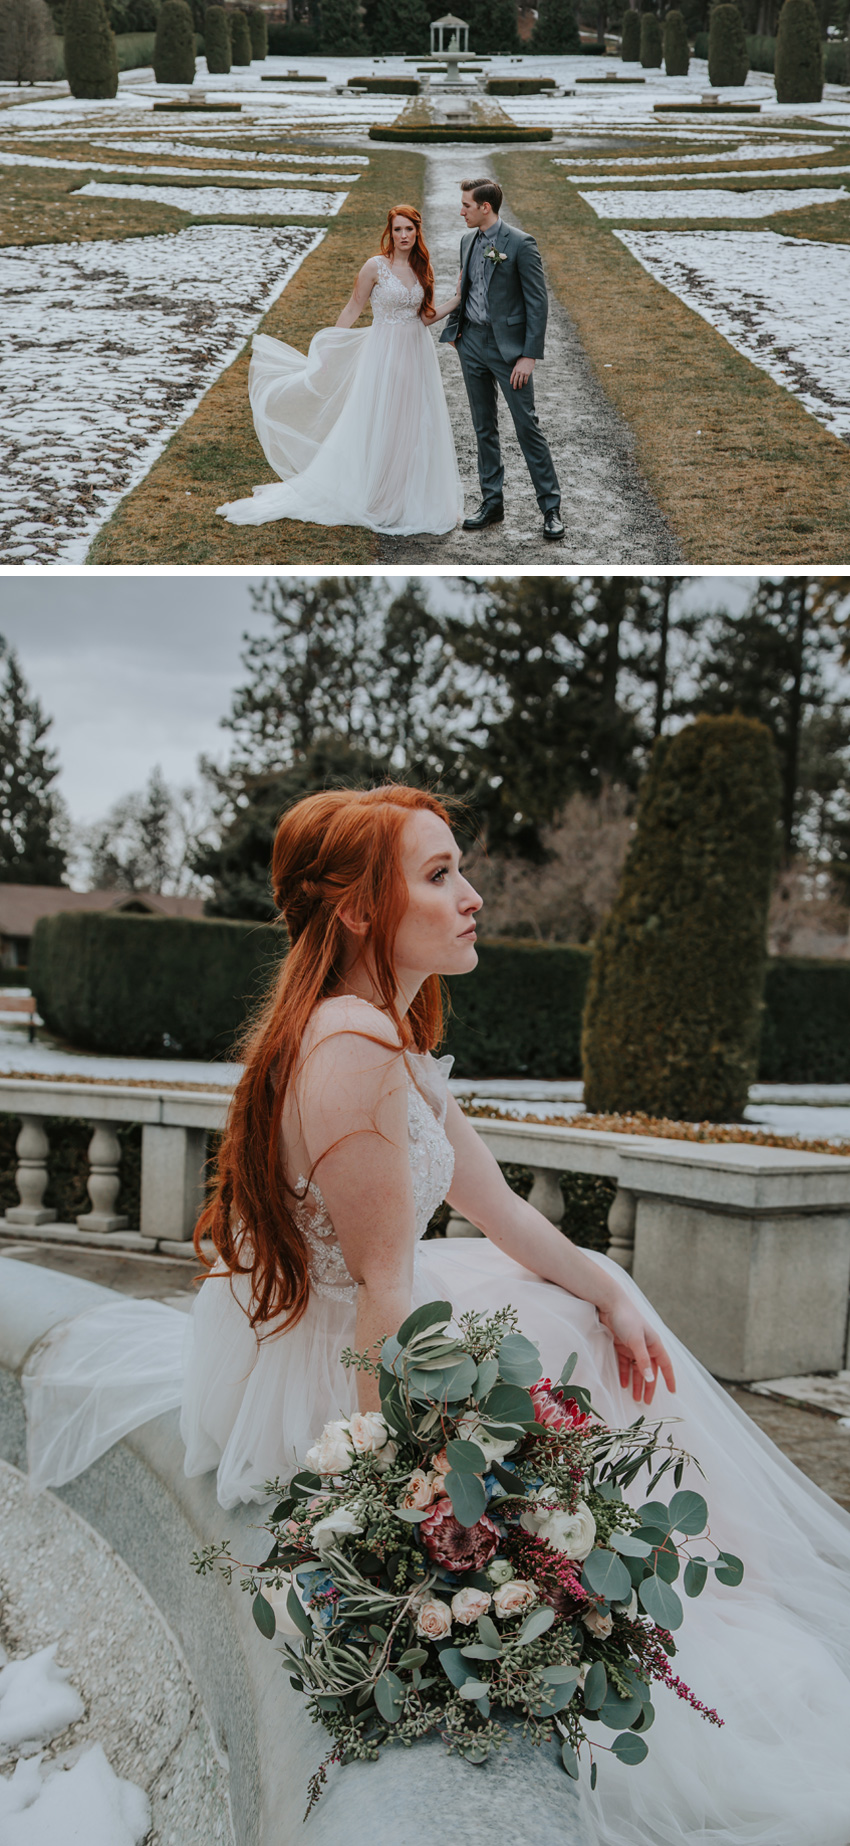 Bridal style shoot inspired in the last frost of the season